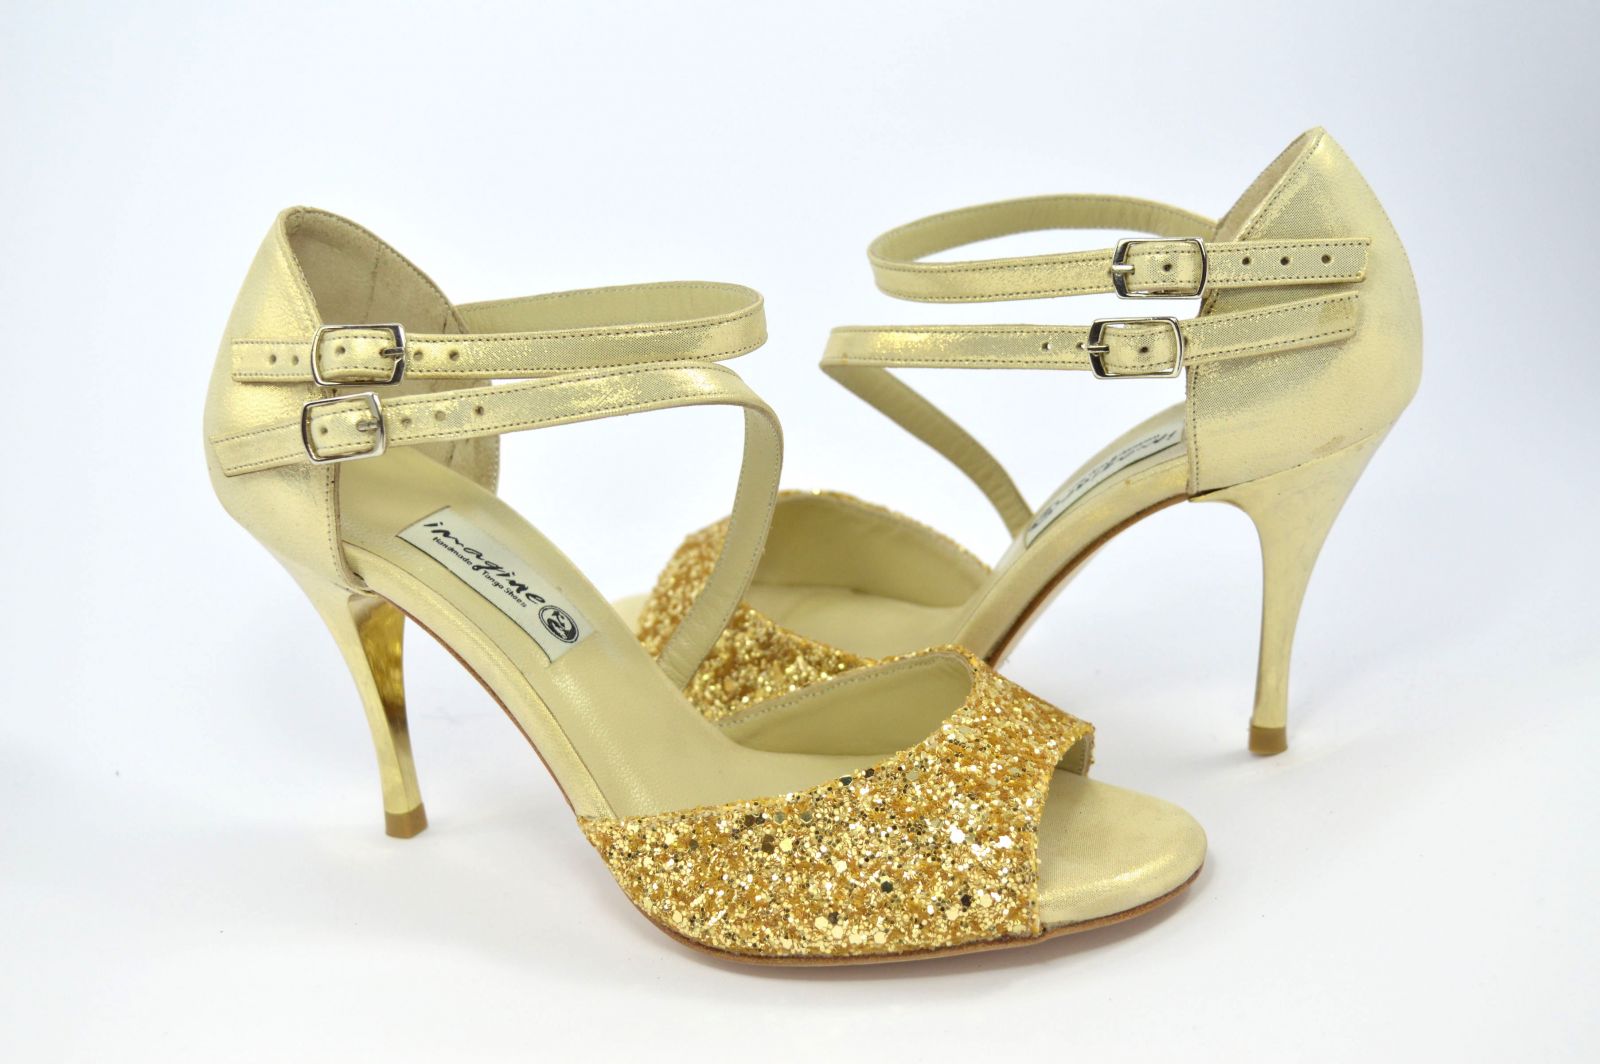 Women argentine tango shoe, open toe, with double strap, in light gold pearled leather and gold glitter 